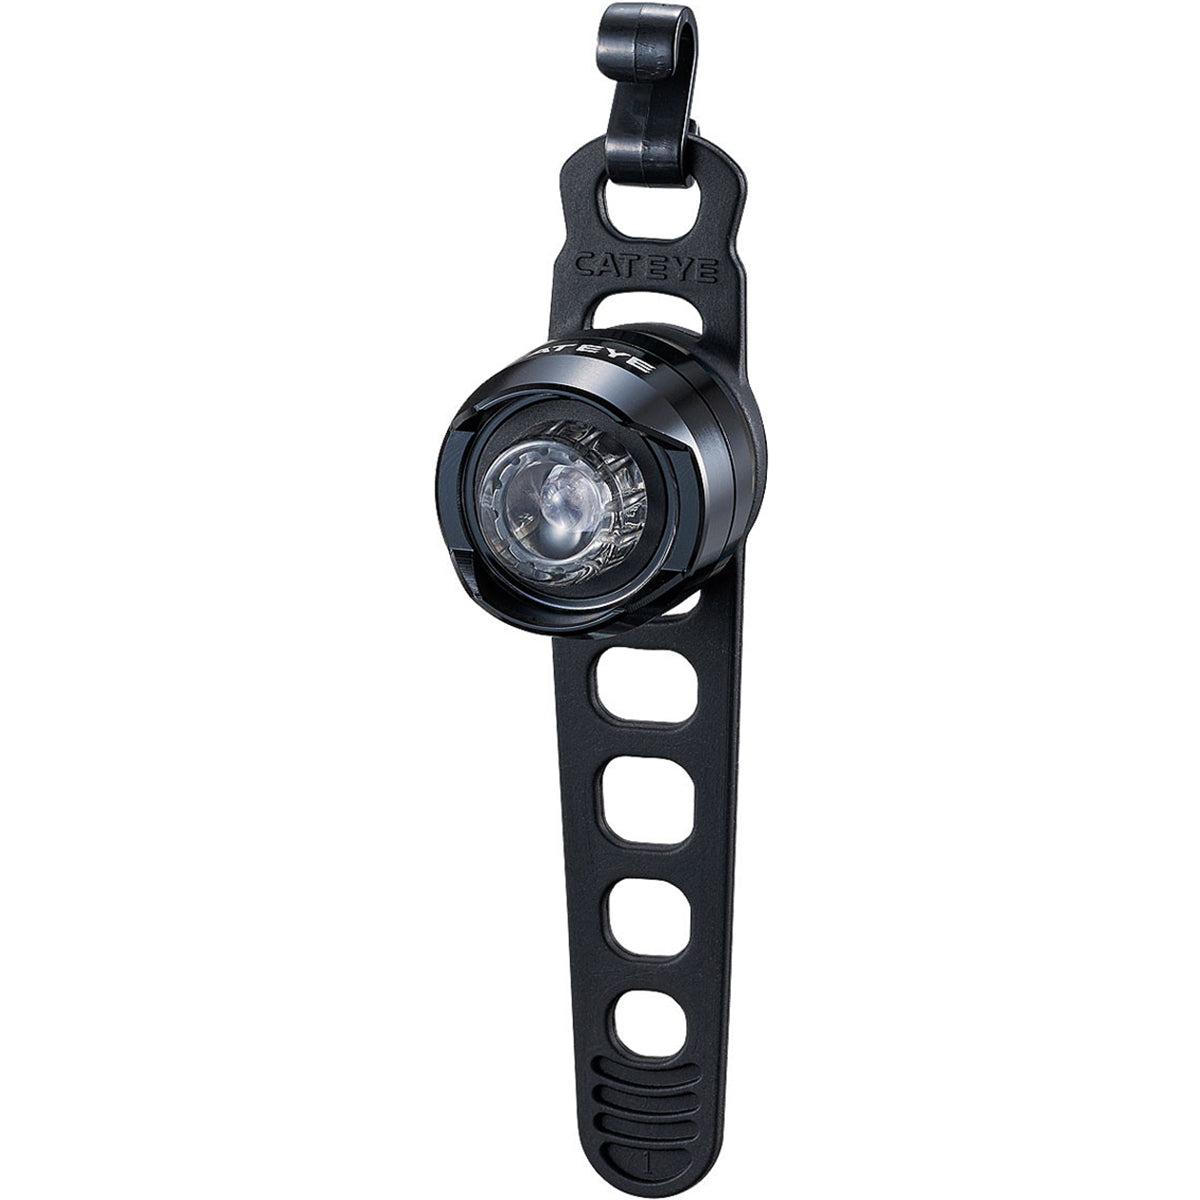 Cateye Orb Front and Rear Bicycle Light Combo Pack - SL-LD160 F/R CatEye